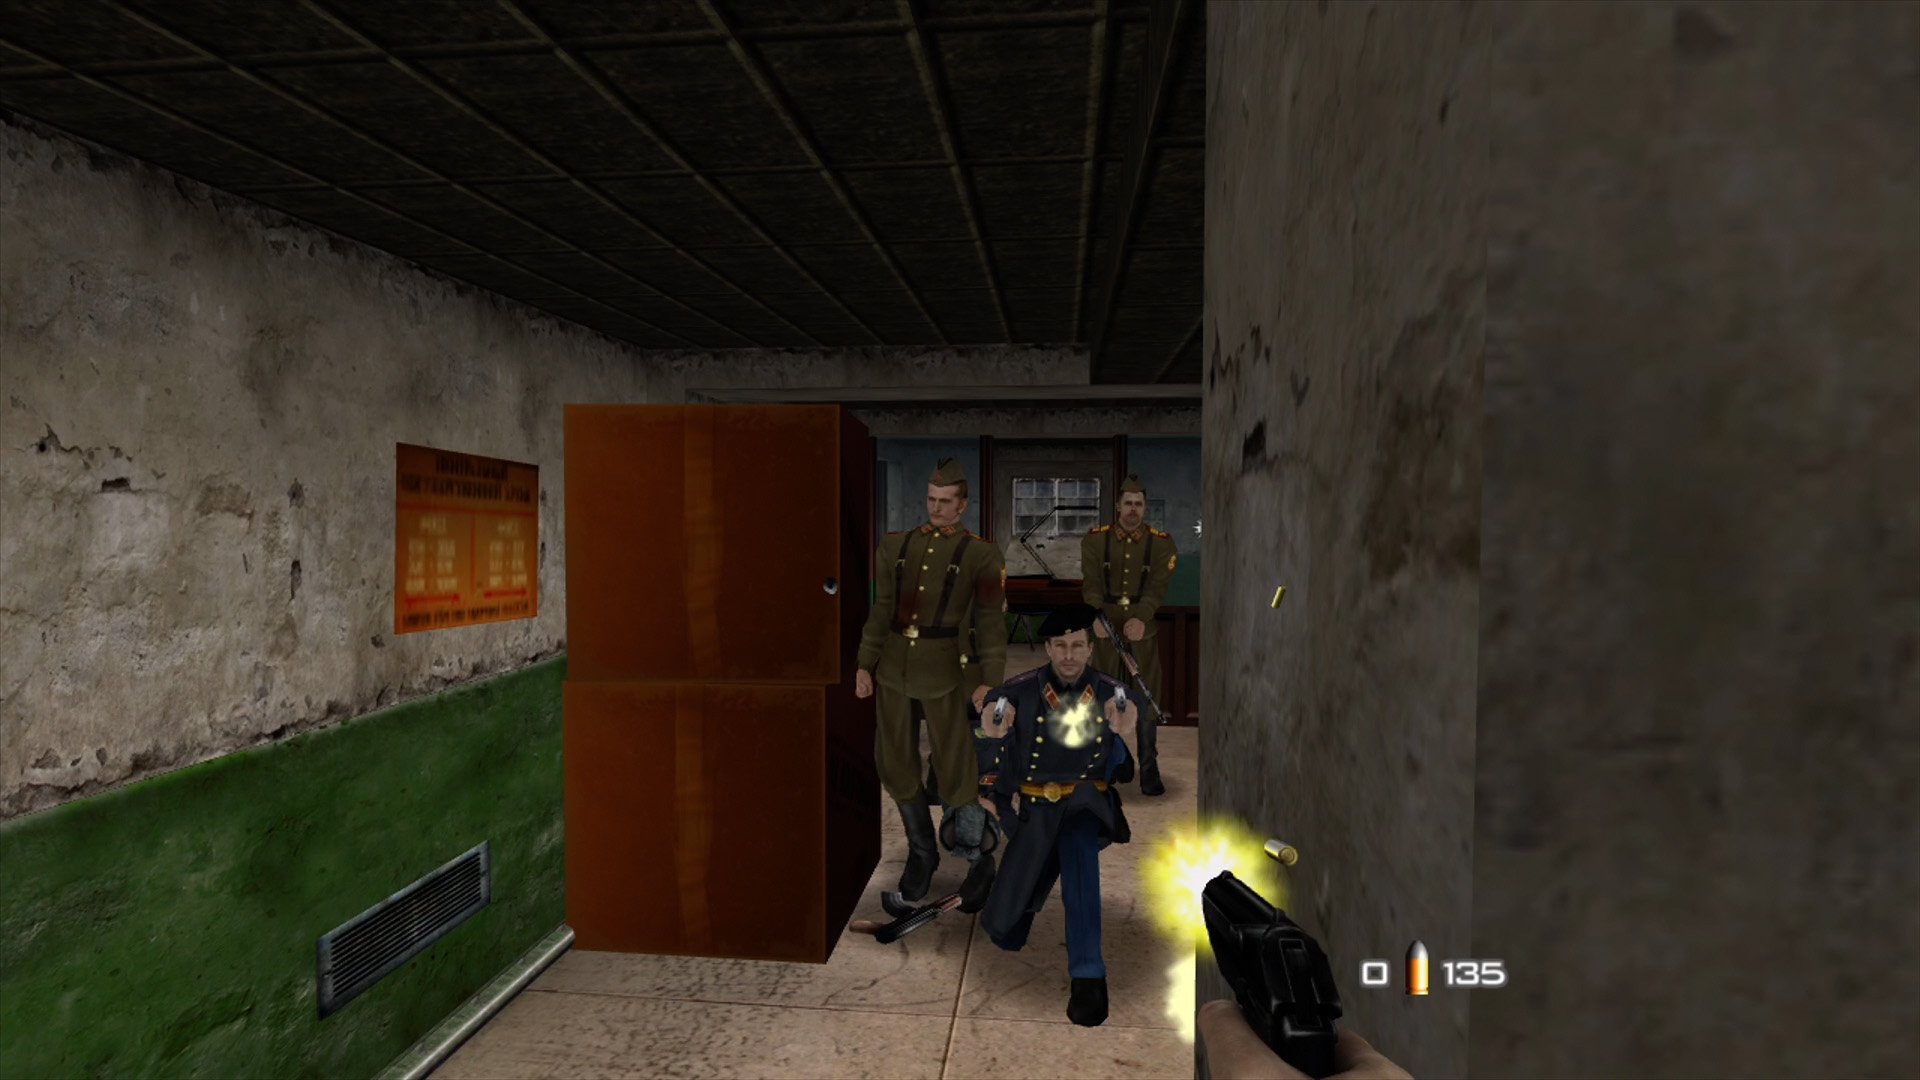 Review: GoldenEye 007 HD is the greatest remaster you'll likely